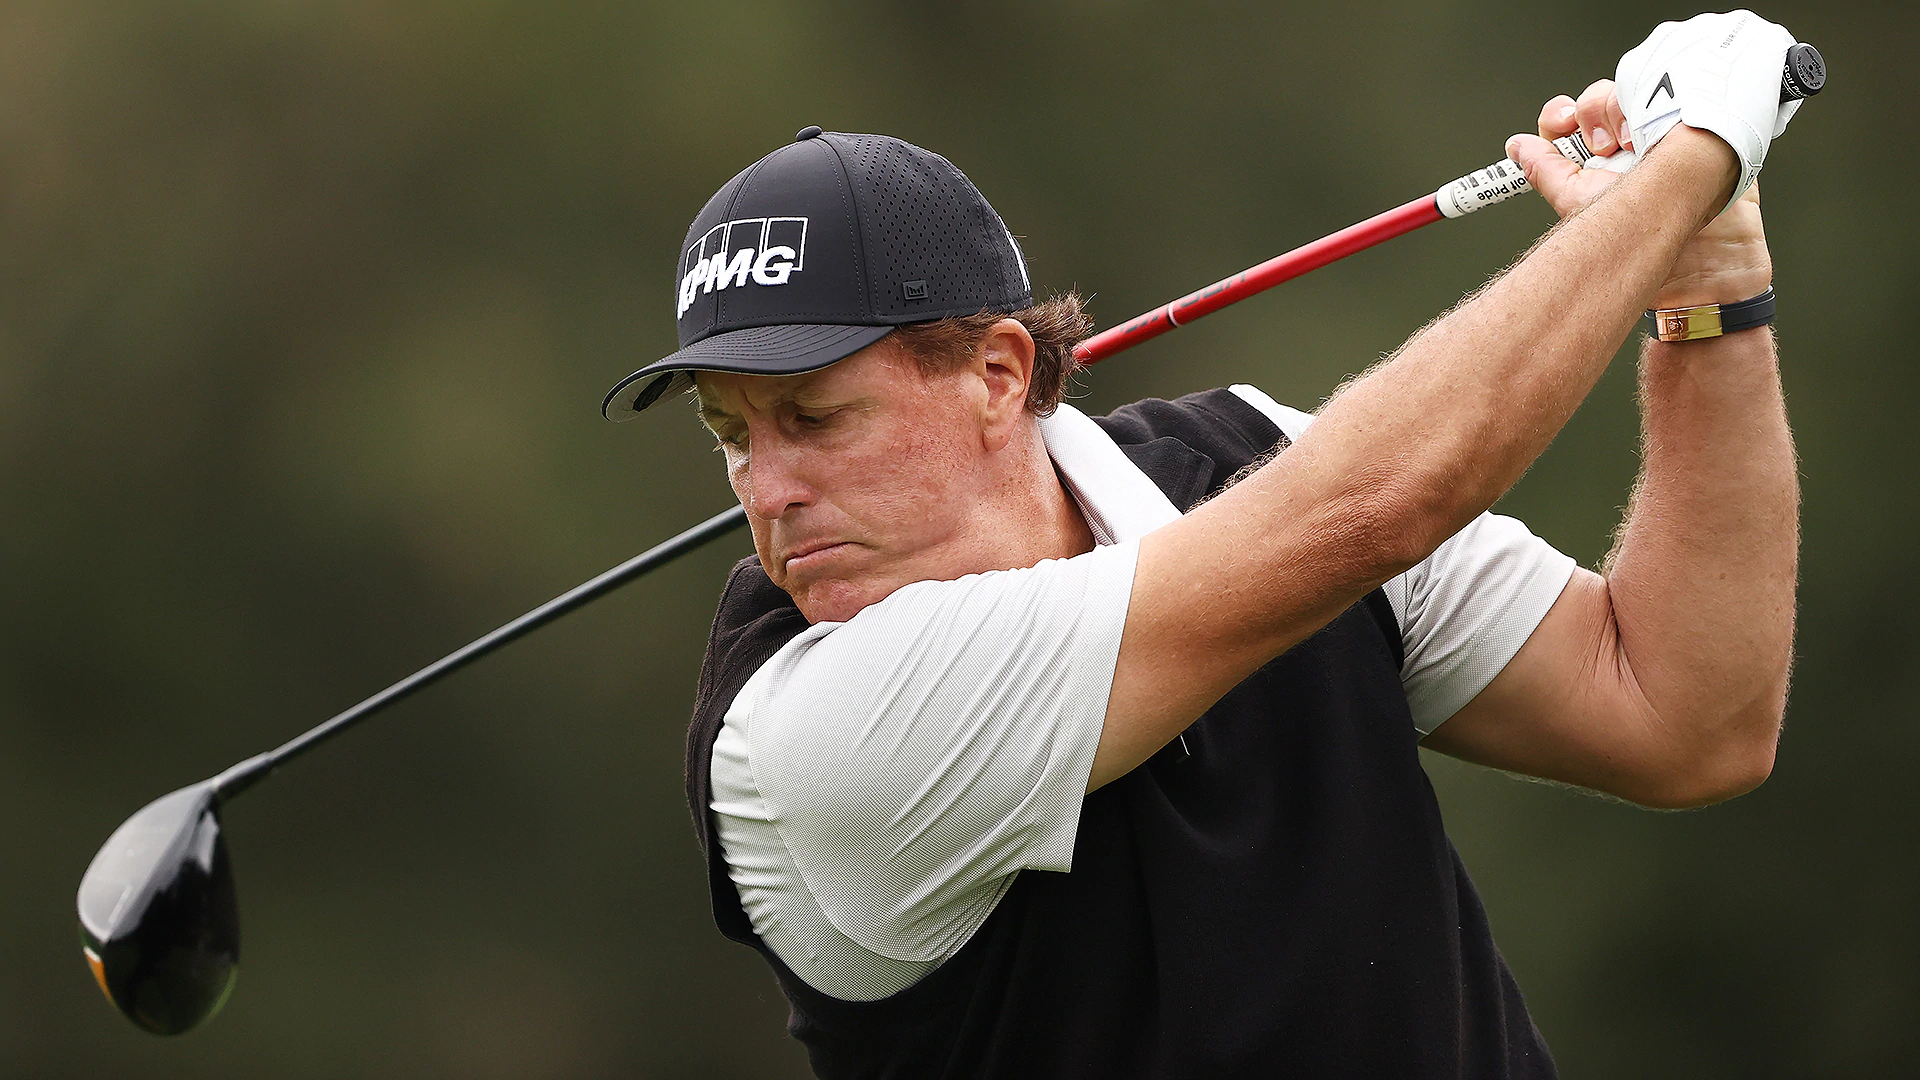 Phil Mickelson to use 47 1/2-inch driver shaft at Masters